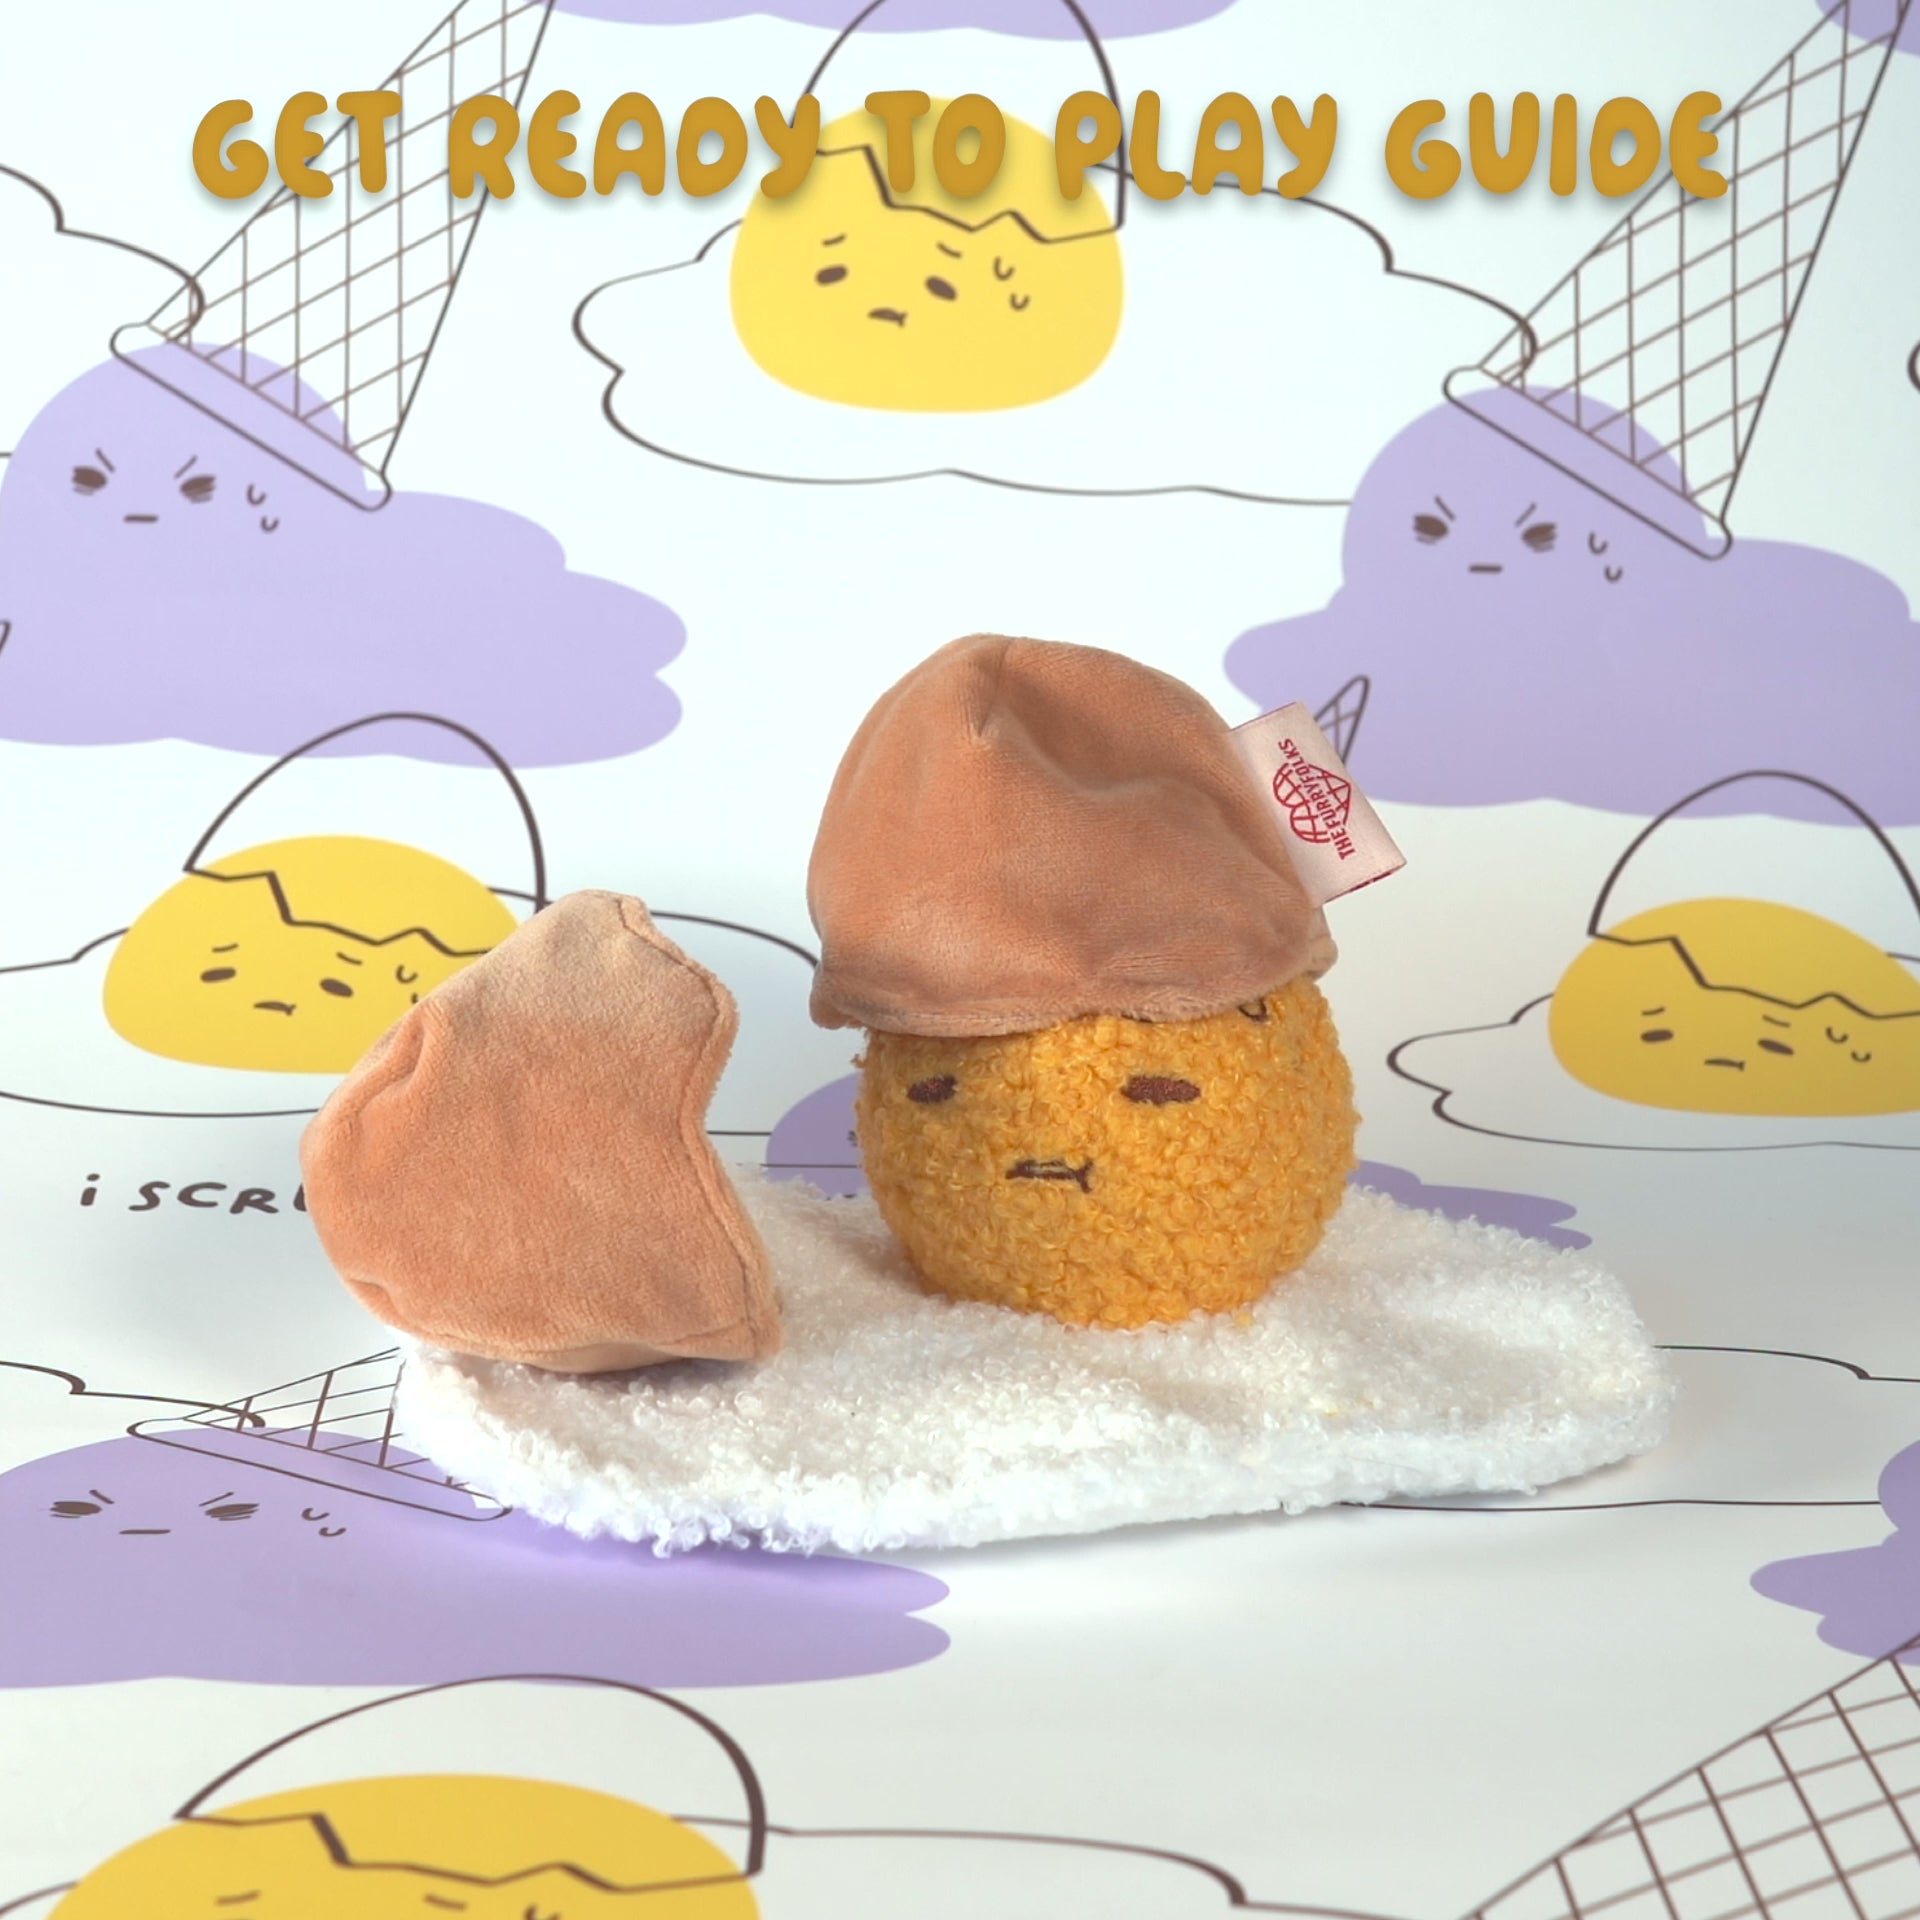 egg-cellent Nosework Dog Toy - Get ready to play guide